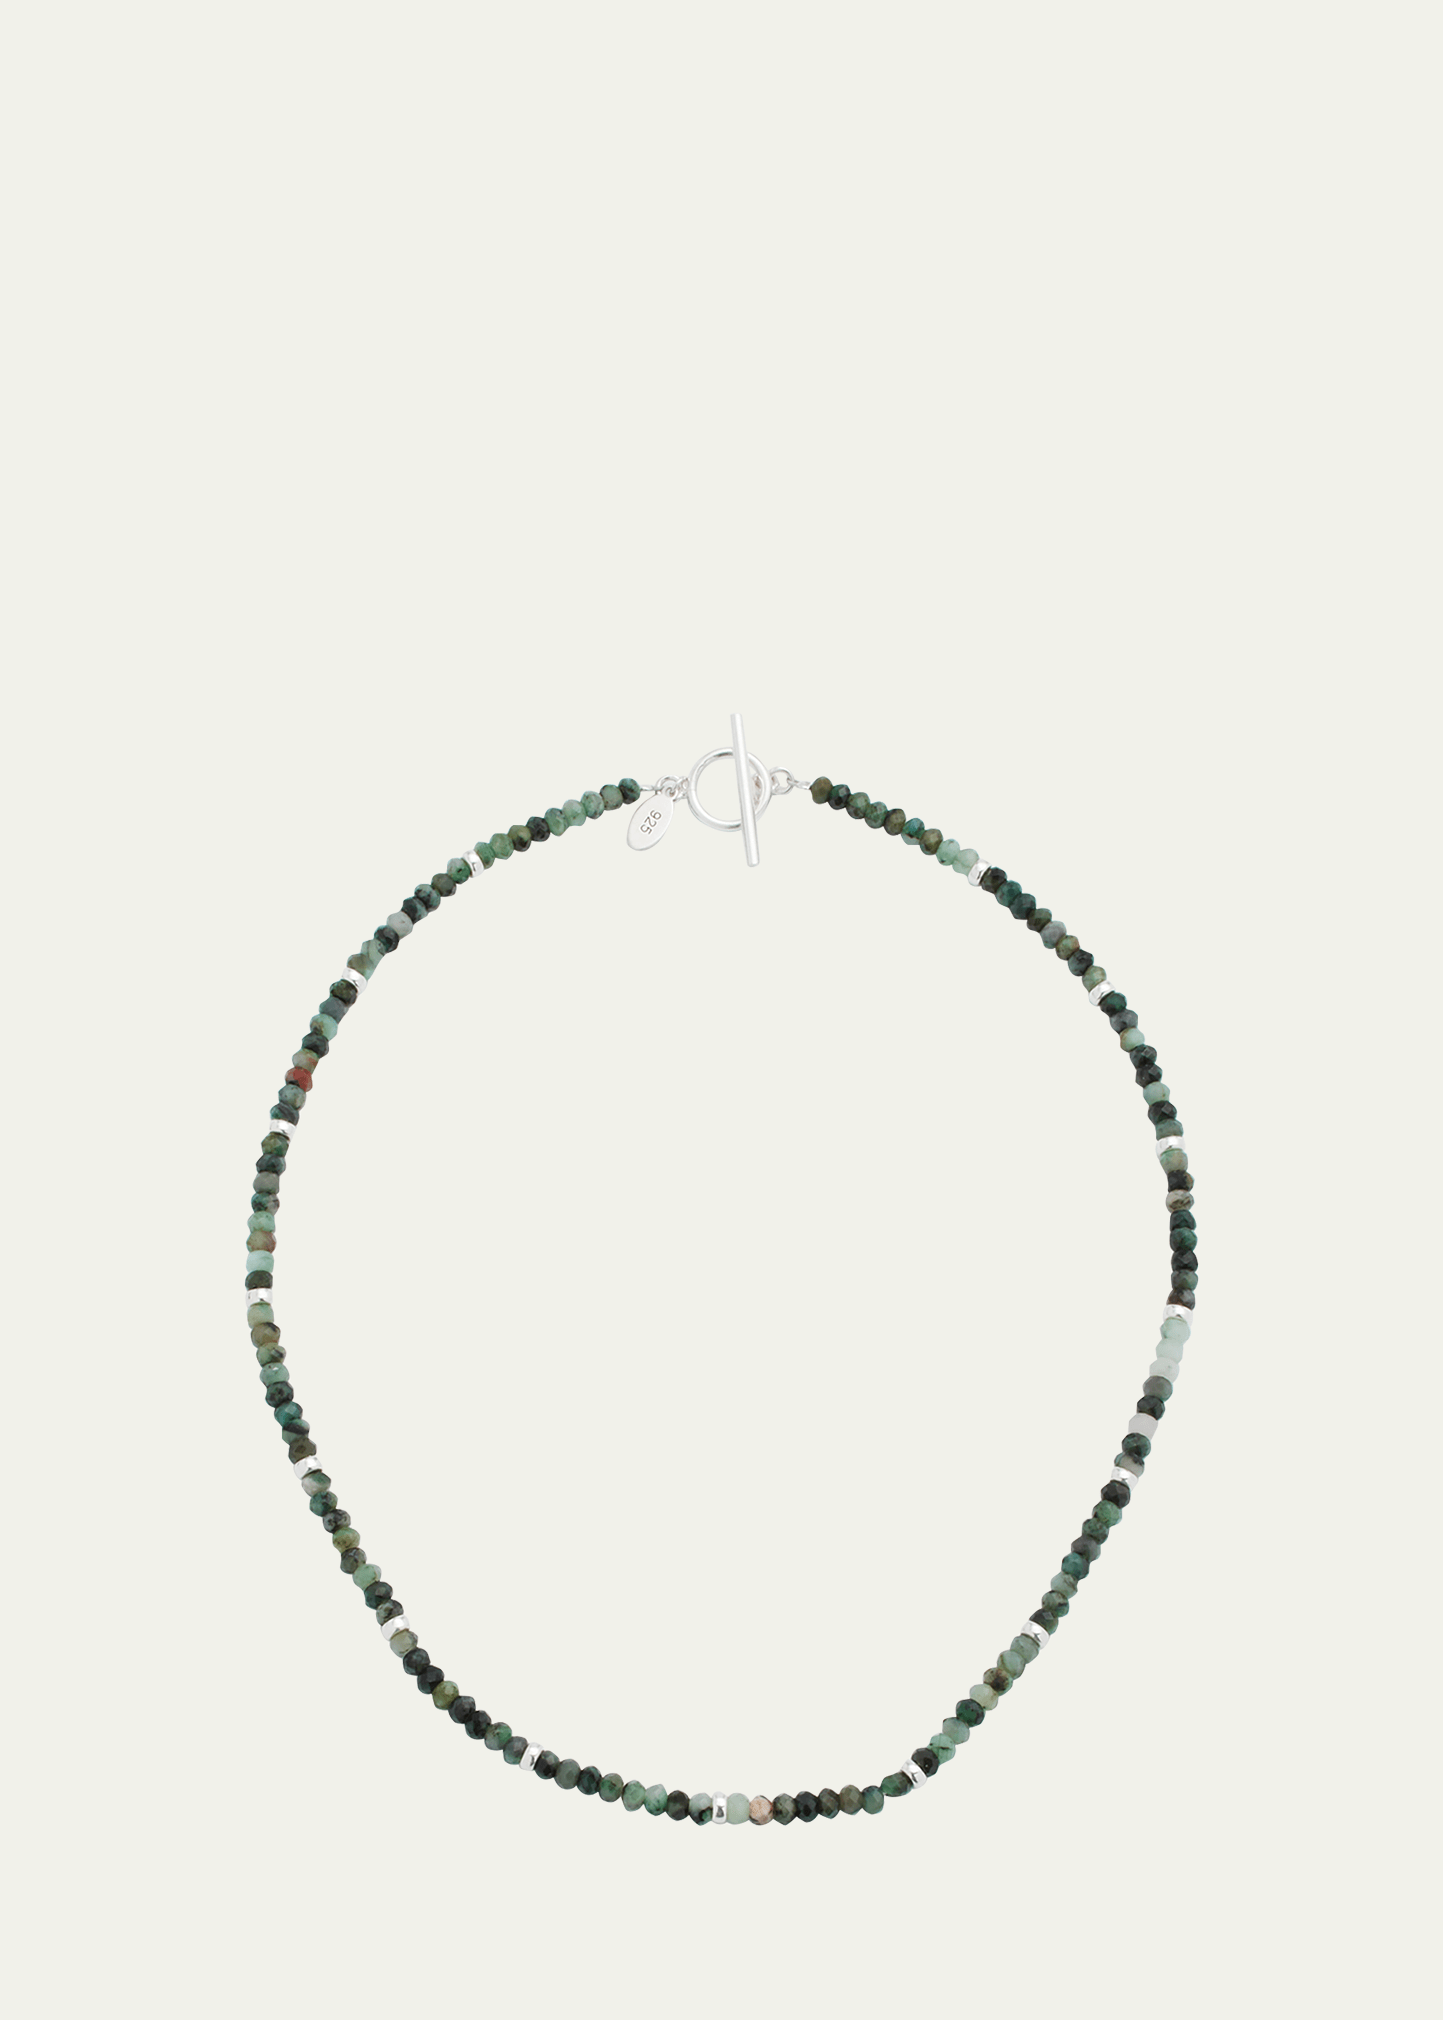 Men's Emerald Beaded Necklace with Sterling Silver Spacers